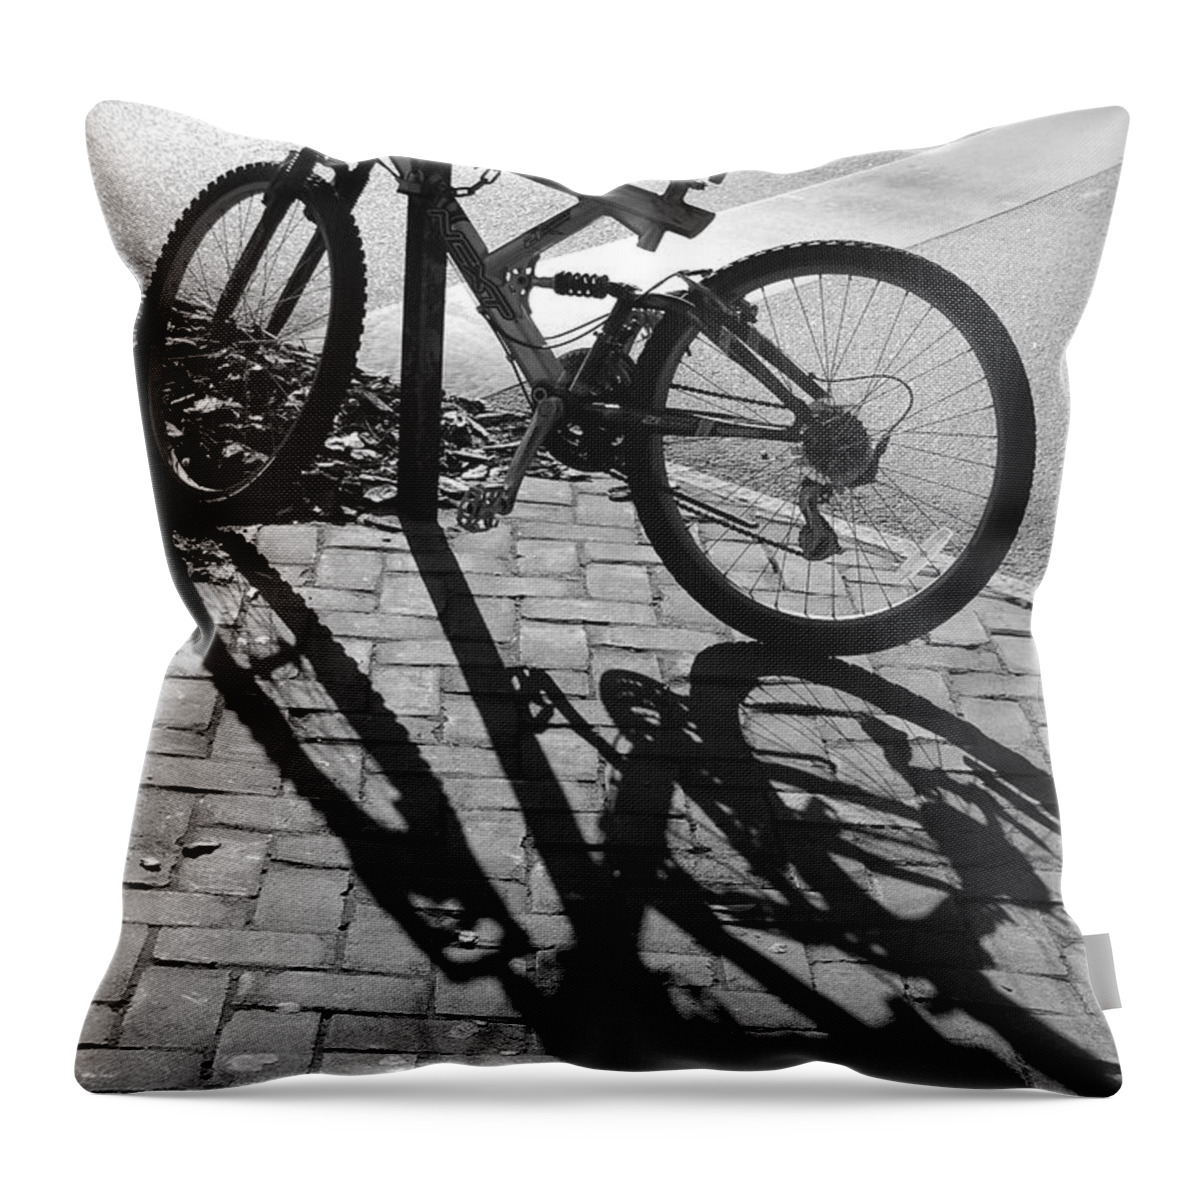 Black And White Throw Pillow featuring the photograph Shadow Play by Suzanne Gaff